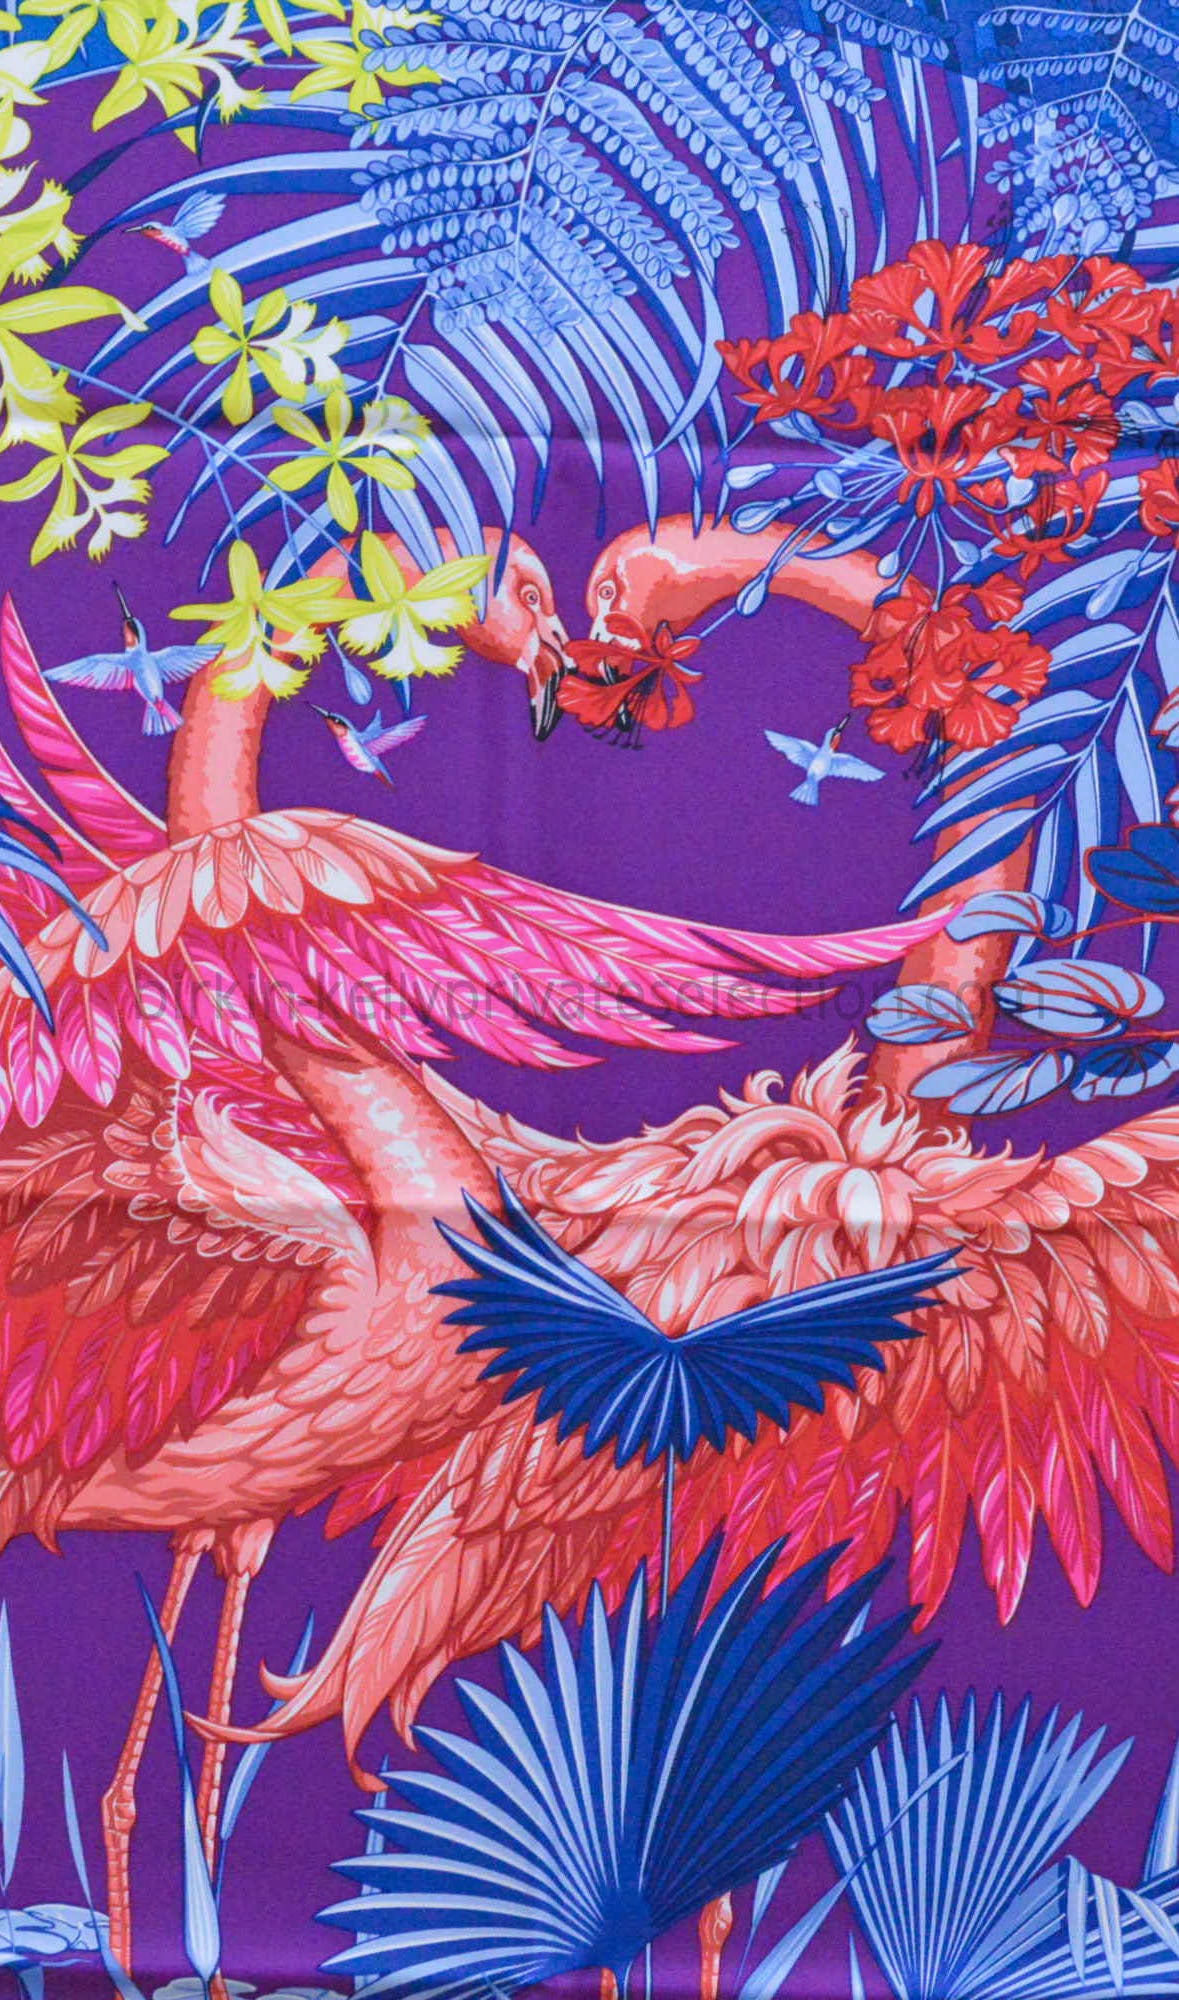 Hermes Carre Twill 100% Soie FLAMINGO PARTY ROUGE-VIOLET

Bought it in hermès store in 2015.

Size; 90X90 Cm.

Model; FLAMINGO PARTY

Details:
*Protective felt removed for purposes of photography only.
-Original Invoice.
-Shipment and